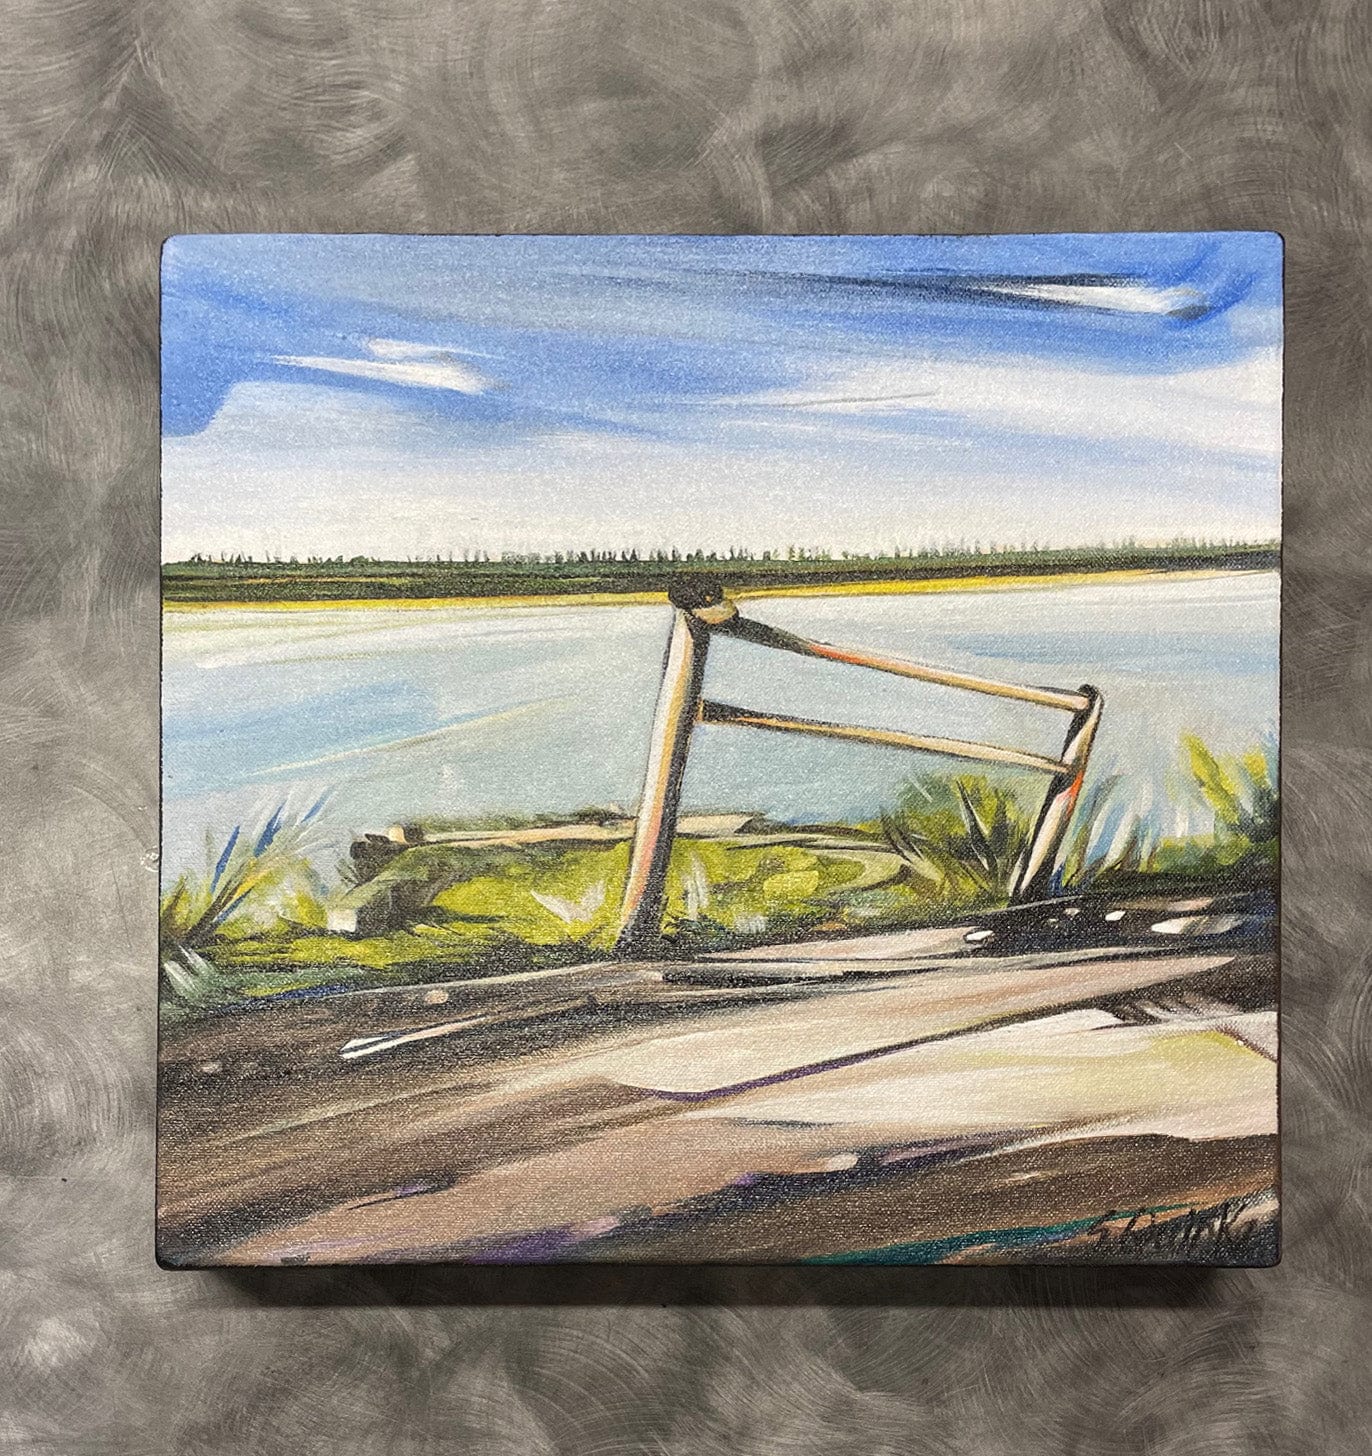 Sharon Quirke painting #18 River Gate & Cap Art Works Gallery